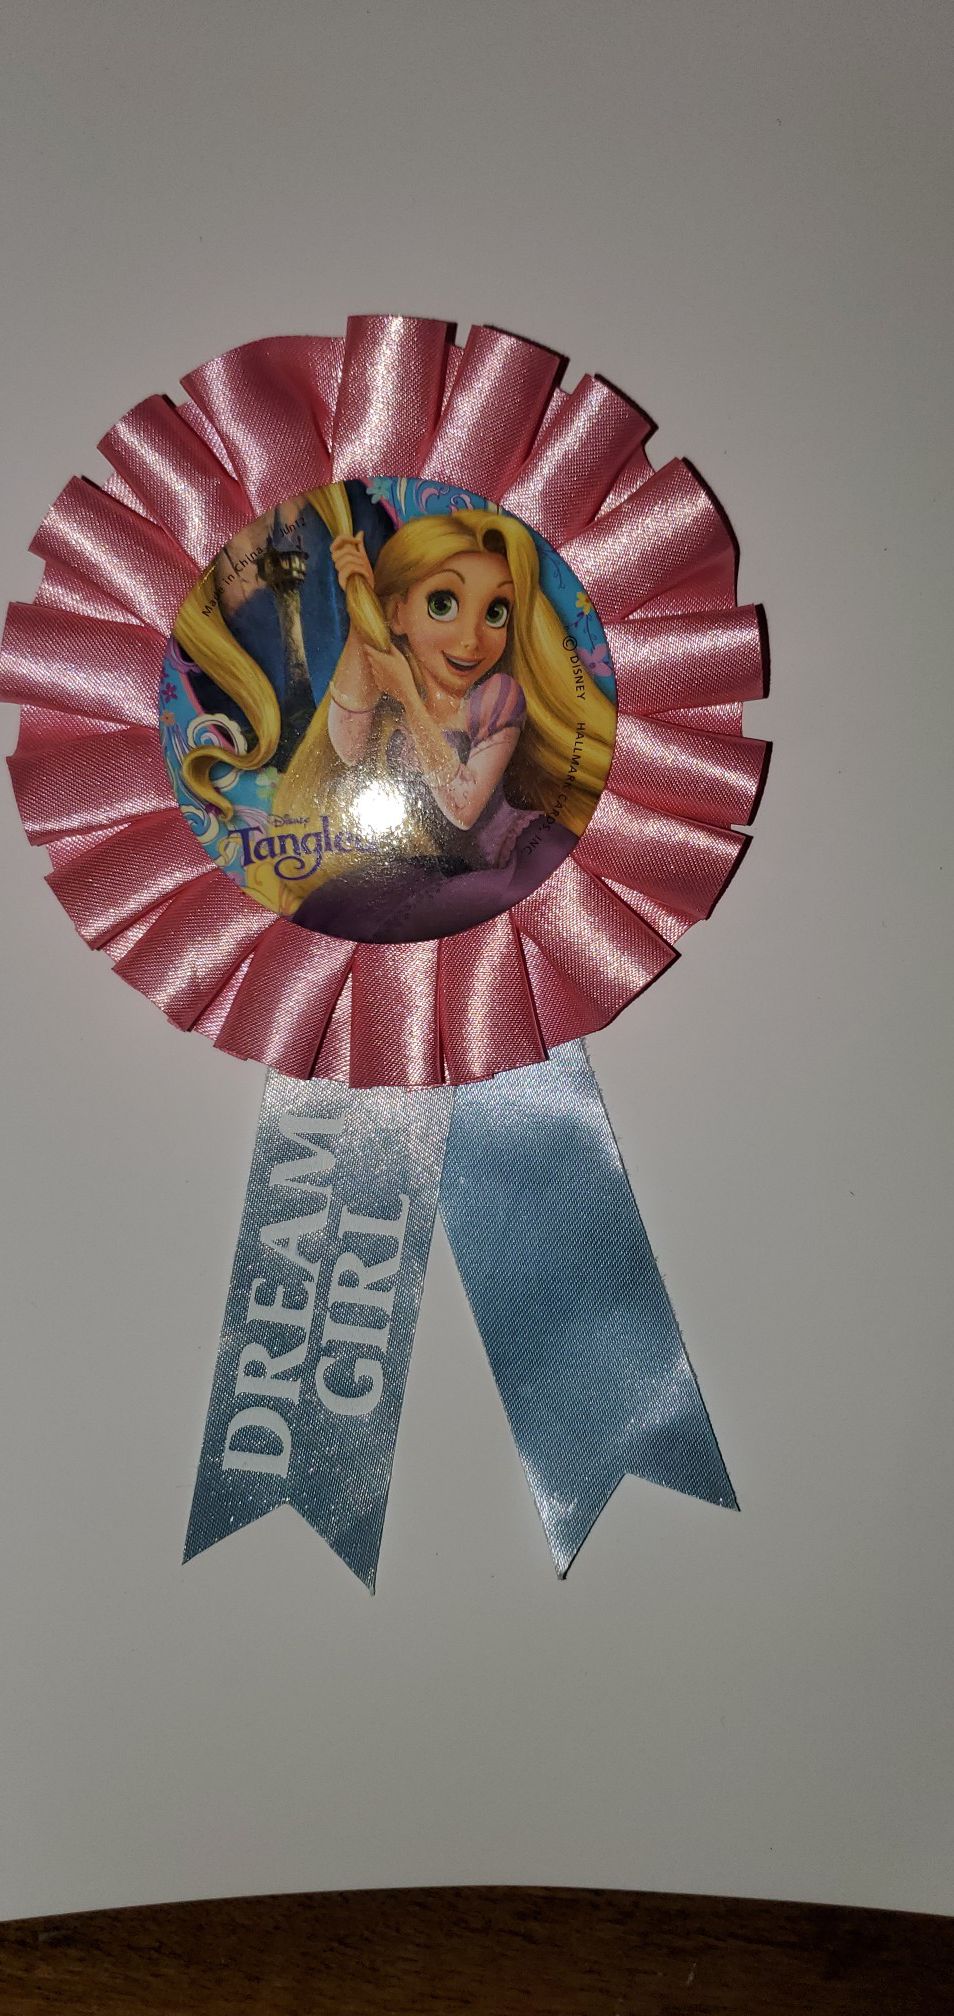 Tangled Dream Girl Pink Ribbon Disney Button Badge Pin Authentic Vintage